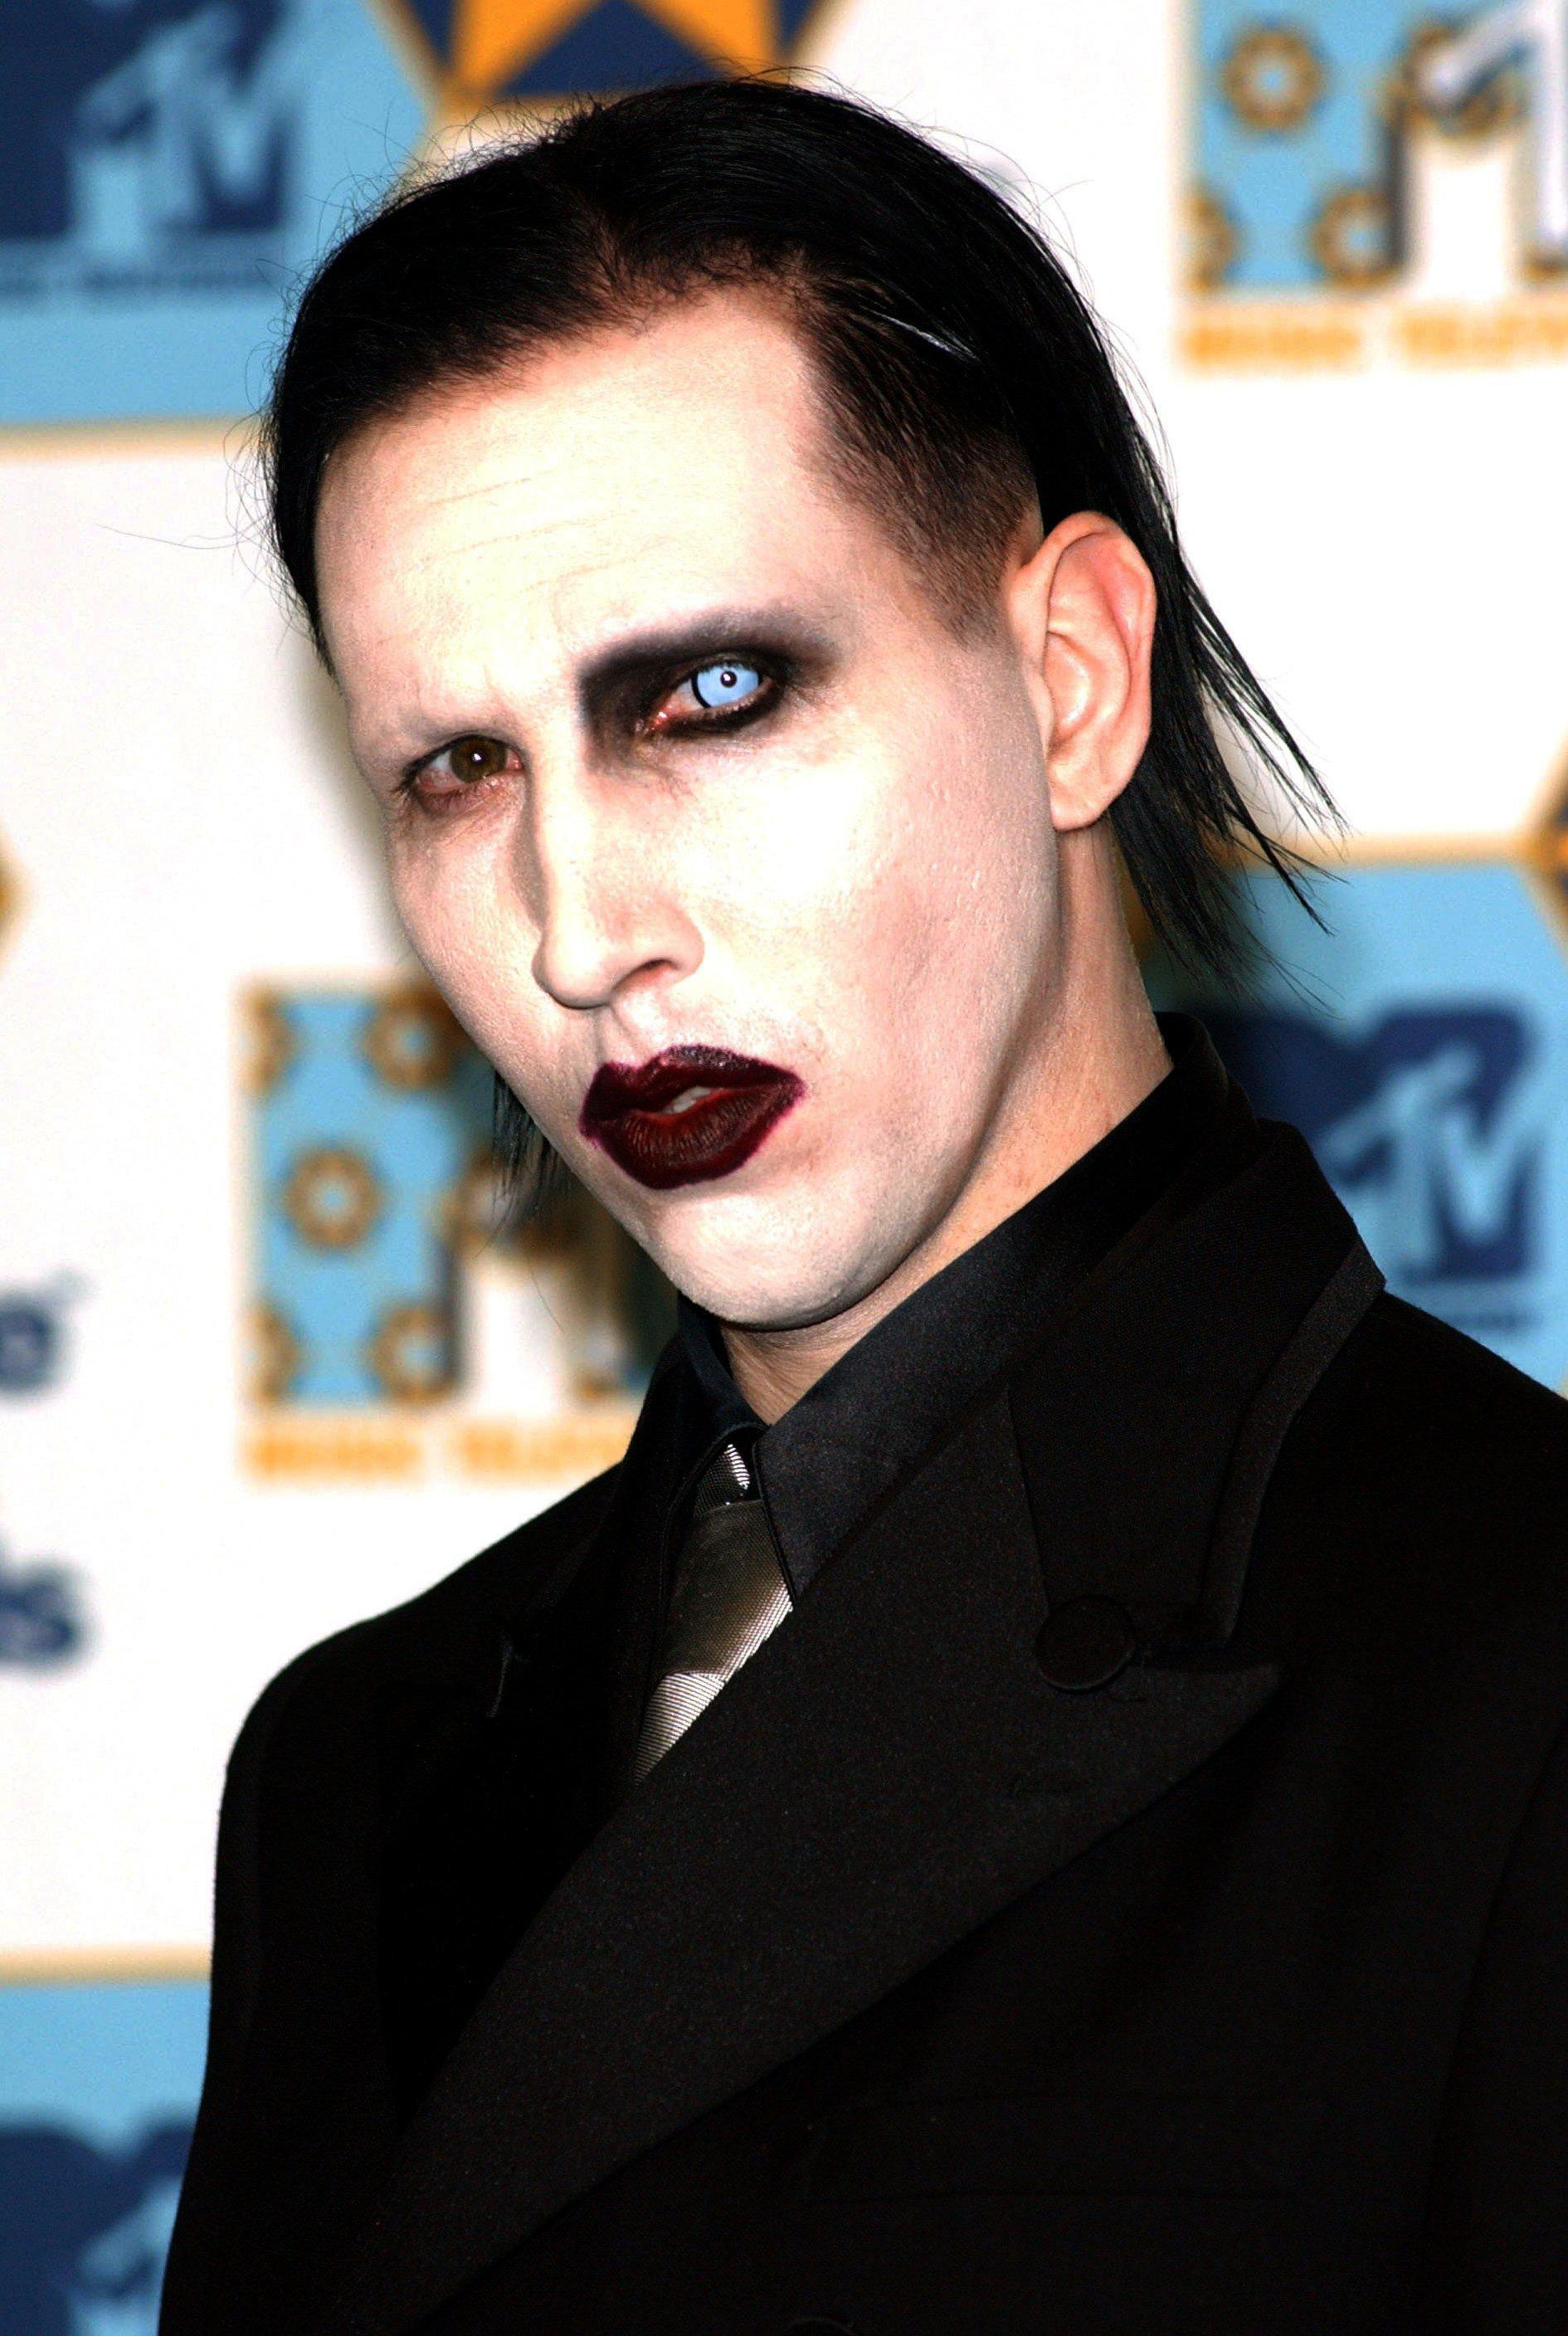 Marilyn Manson refused to sing one of Eminem's hit songs with him ...